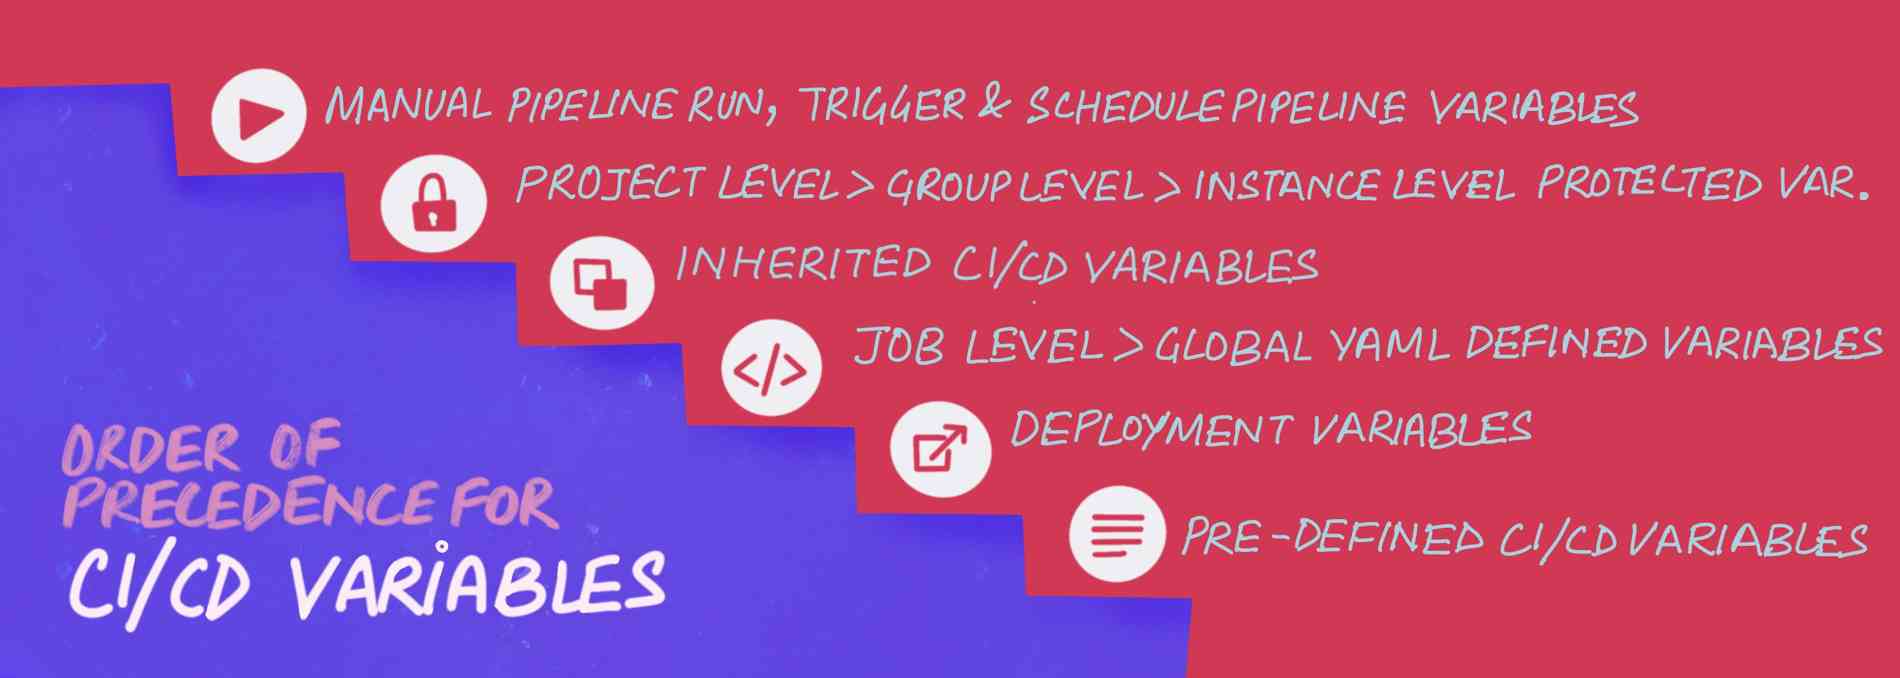 Order of precedence for CI/CD variables: 1) Manual pipeline run, trigger and schedule pipeline variables, 2) Project level, group level, instance level protected variables, 3) Inherited CI/CD variables, 4) Job level, global yml defined variables, 5) Deployment variables, 6) Pre-defined CI/CD variables